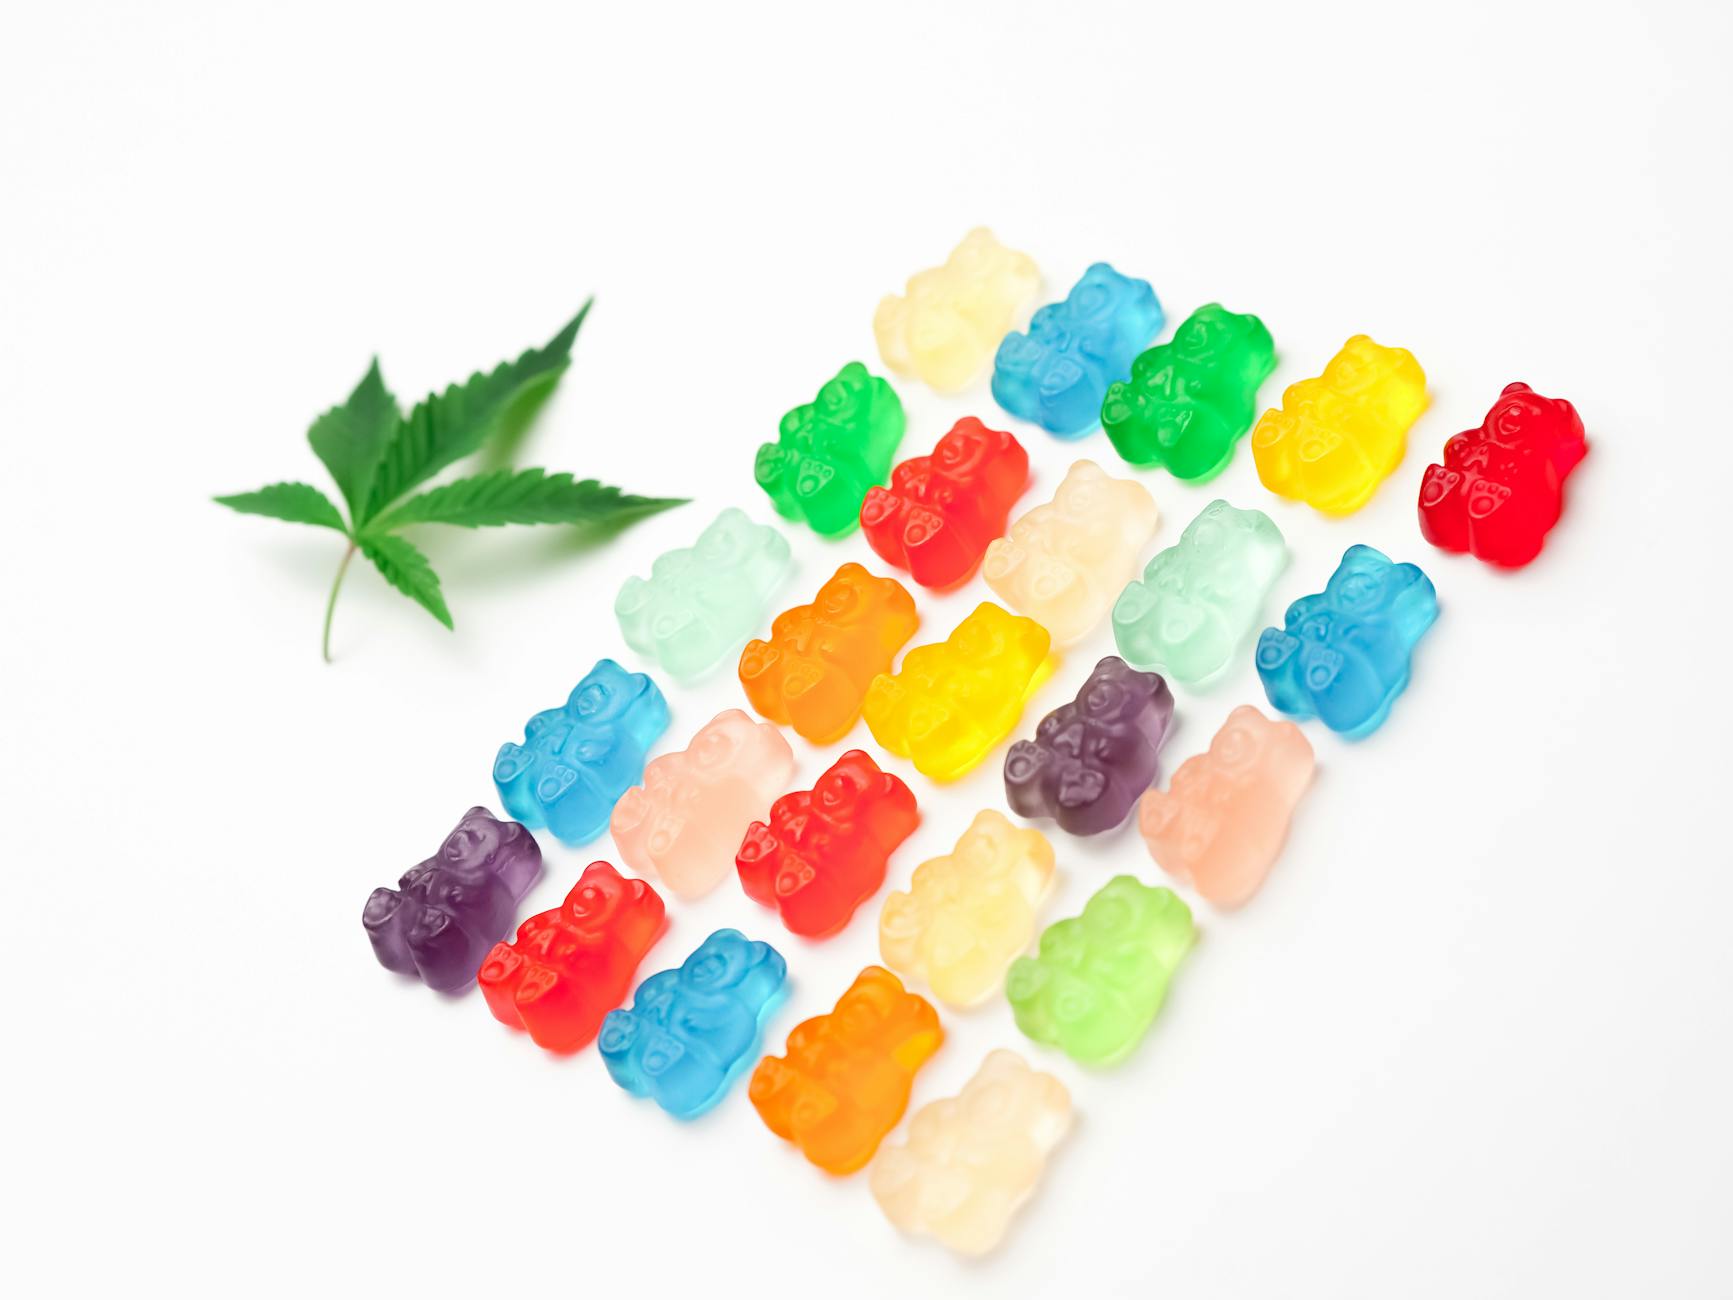 Assorted Colored Gummy Bears on White Background